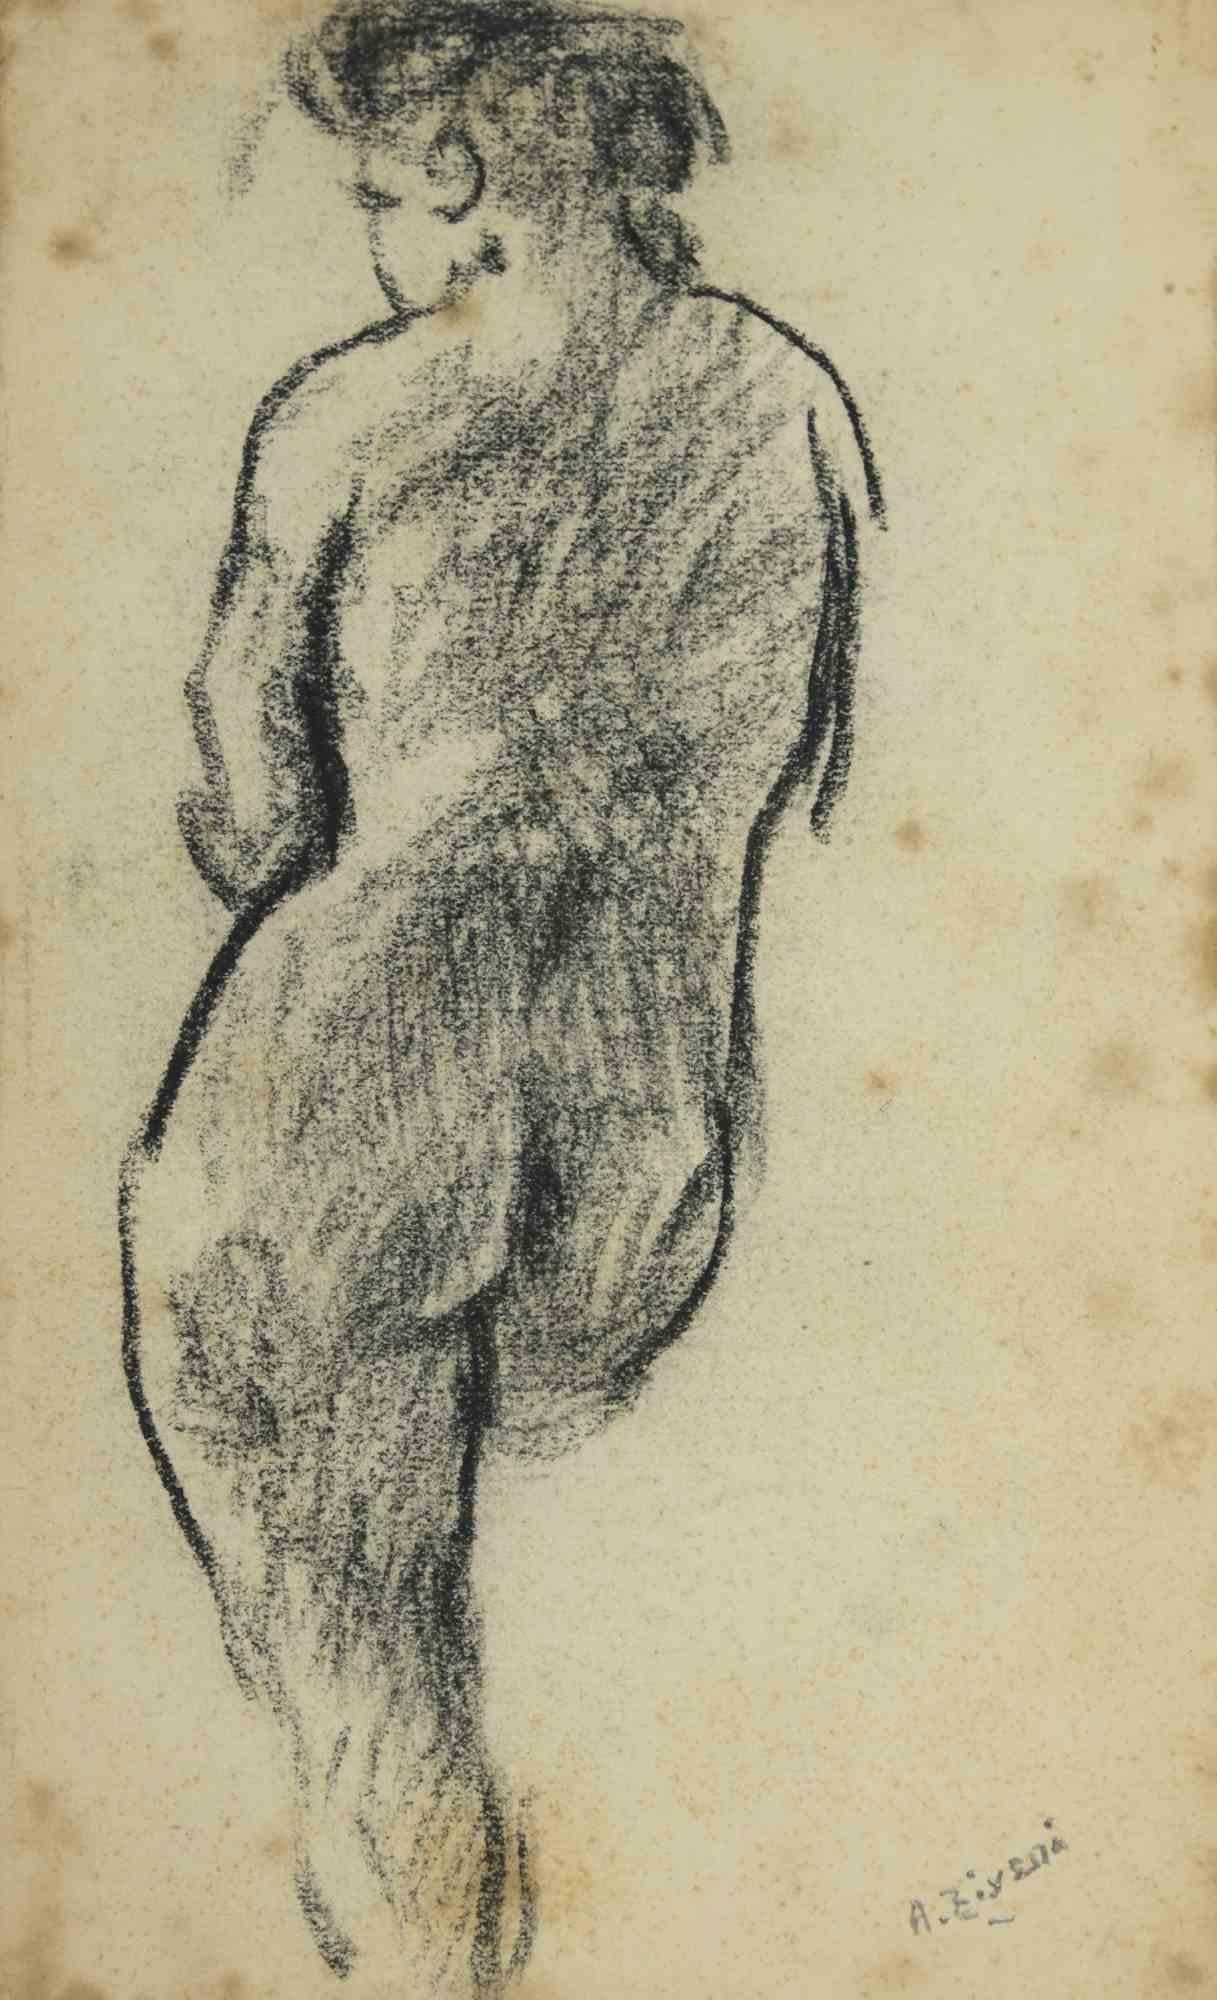 The Nude is a drawing realized by Alberto Ziveri in 1930s.

Charcoal on paper

Hand-signed.

In good conditions. 

The artwork is represented through deft strokes masterly.

Alberto Ziveri (Rome,1908 – 1990), the Italian painter of the Roman school,